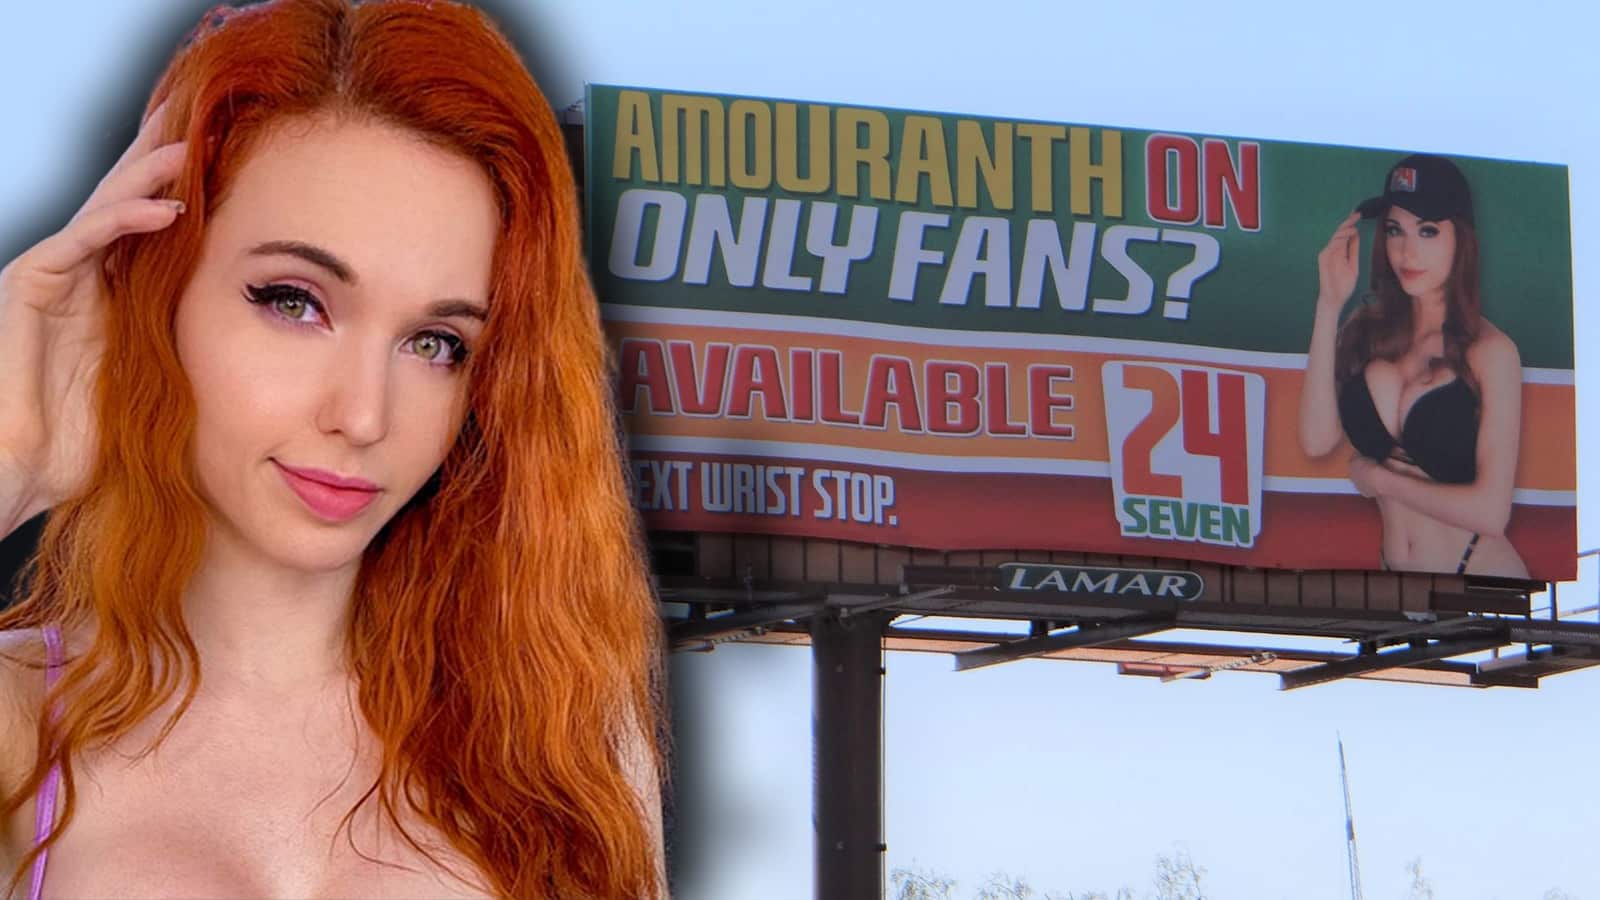 Amouranth Onlyfans Scam